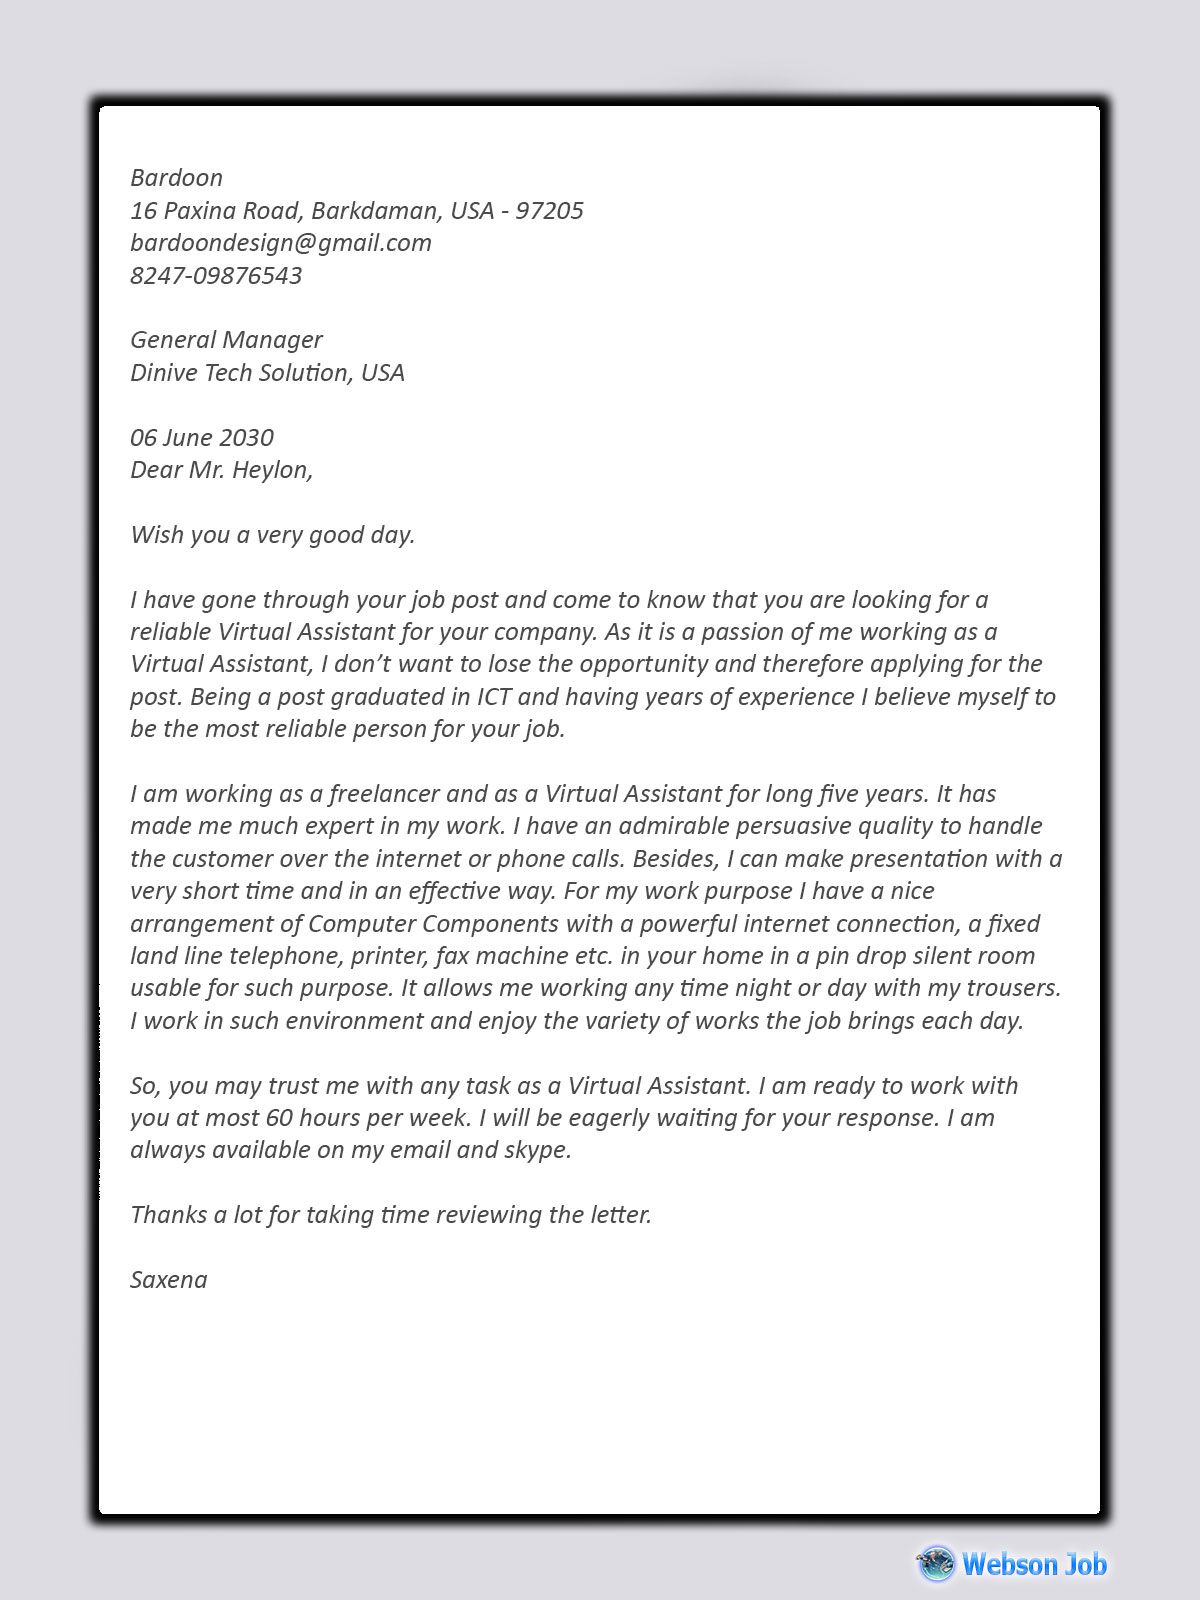 Sample Cover Letter For Virtual Assistant